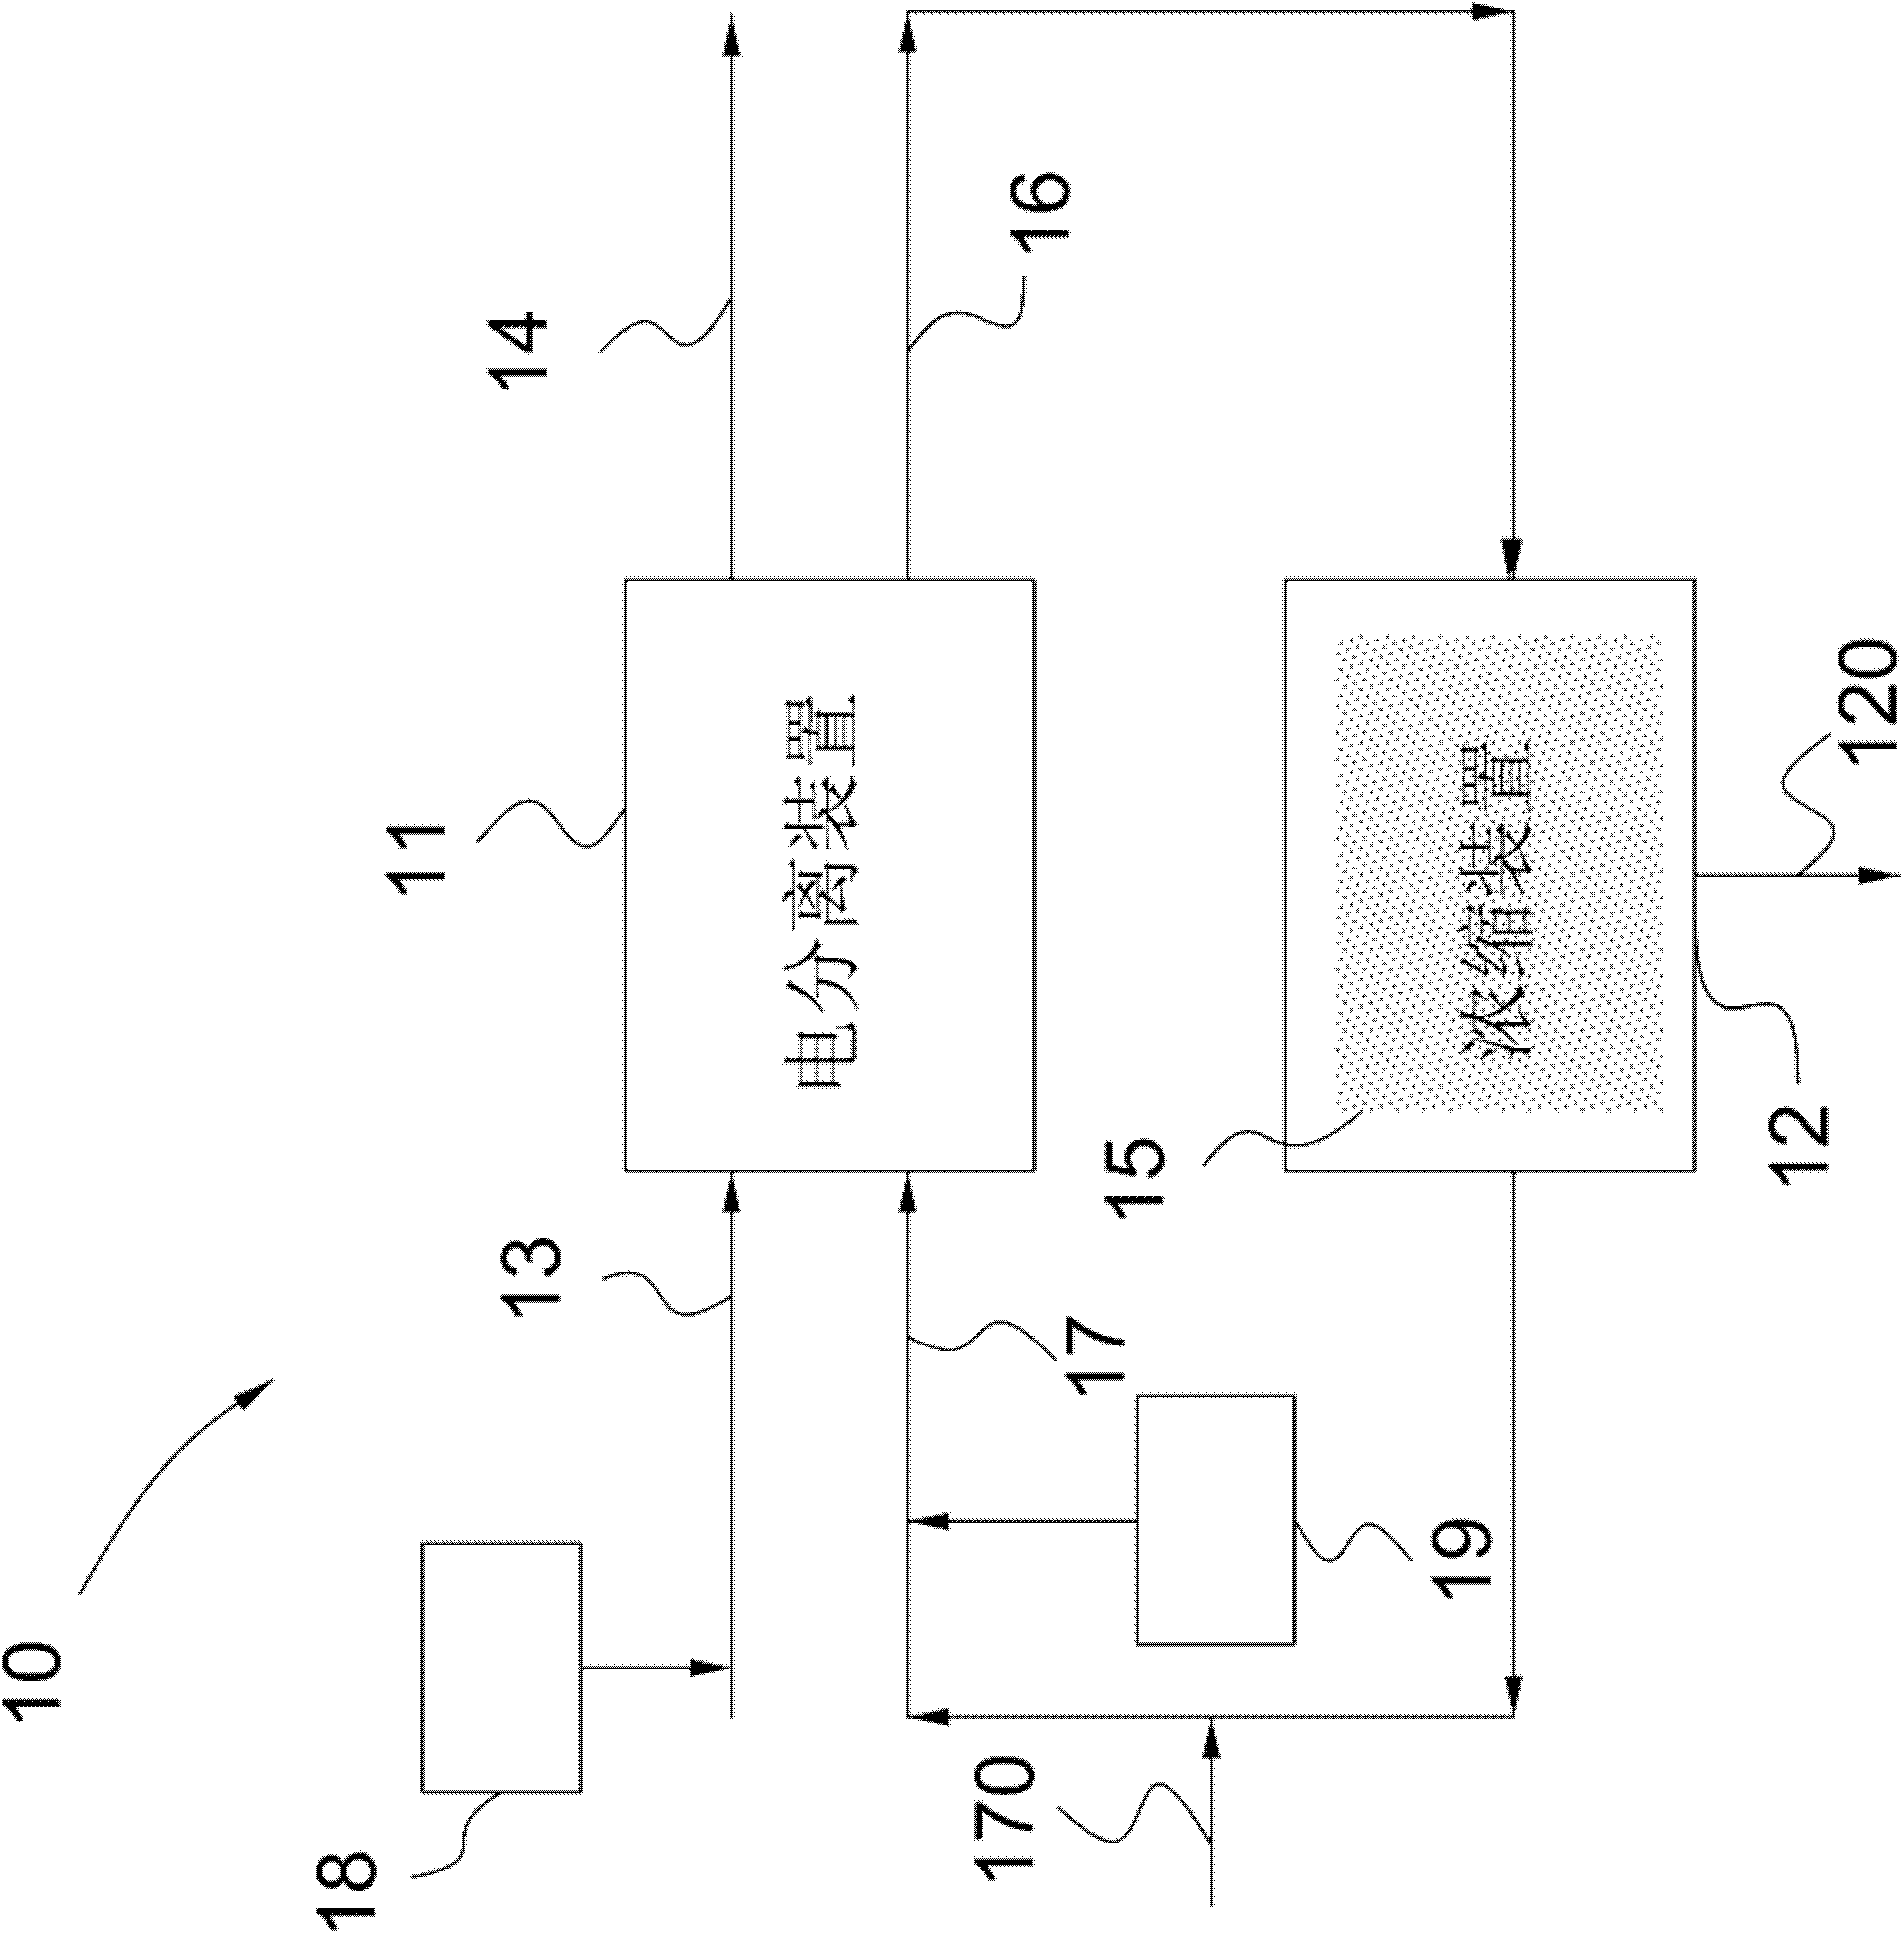 Desalting system and method